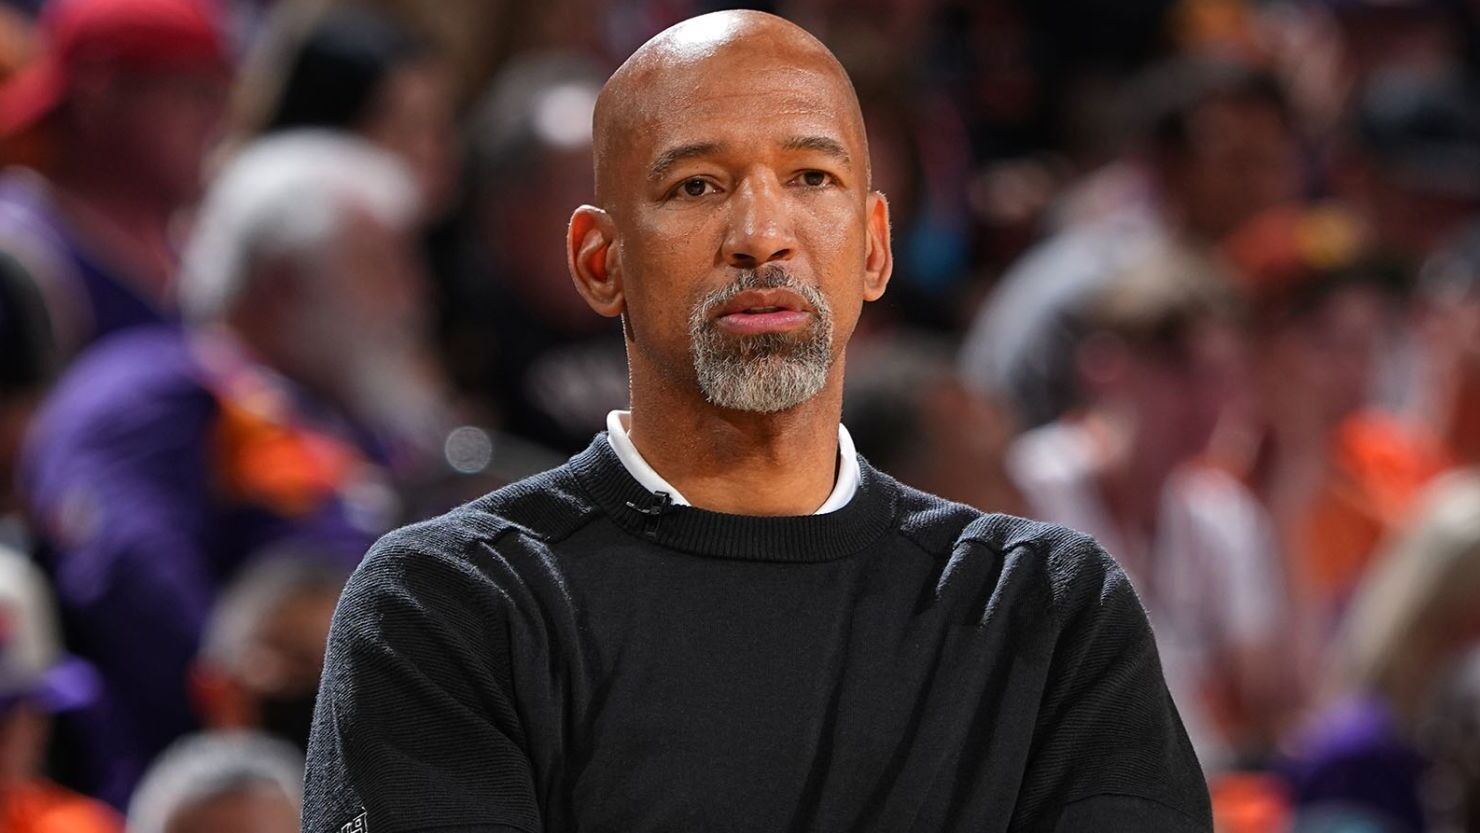 pistons-coach-monty-williams-criticizes-referees-after-controversial-no-call-in-loss-to-knicks